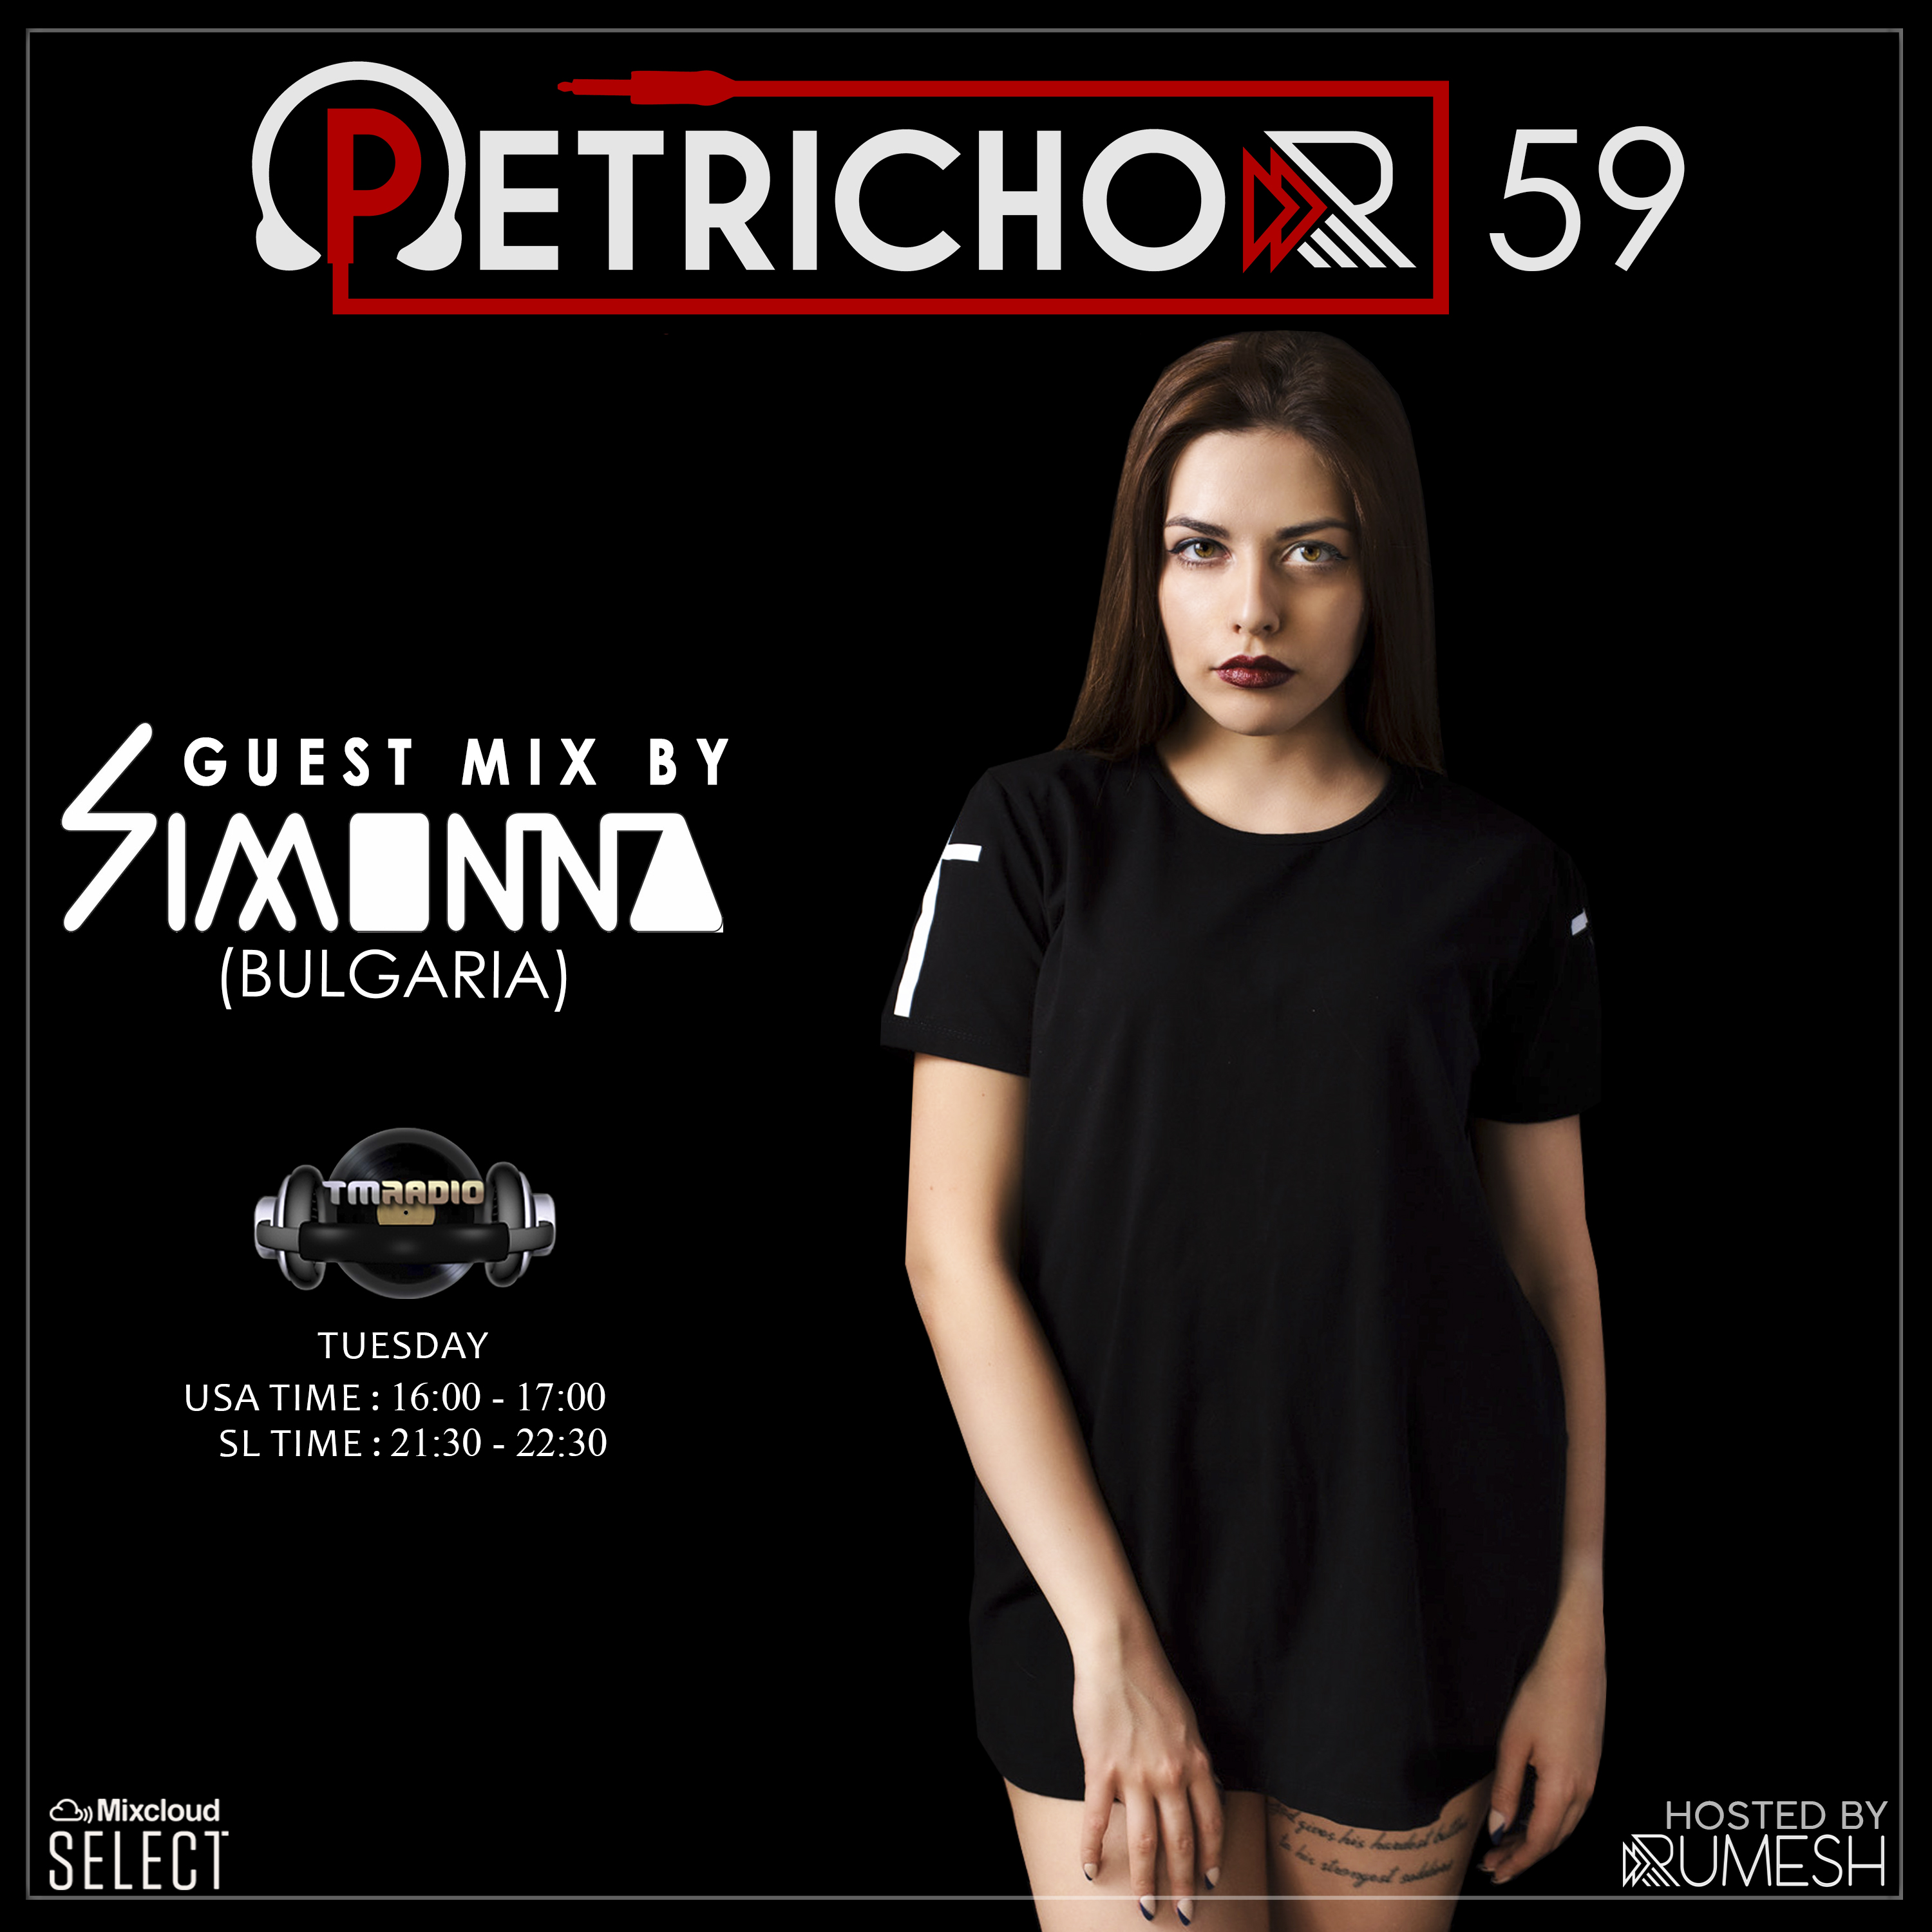 Petrichor 59 guest mix by Simonna (Bulgaria) (from December 24th, 2019)